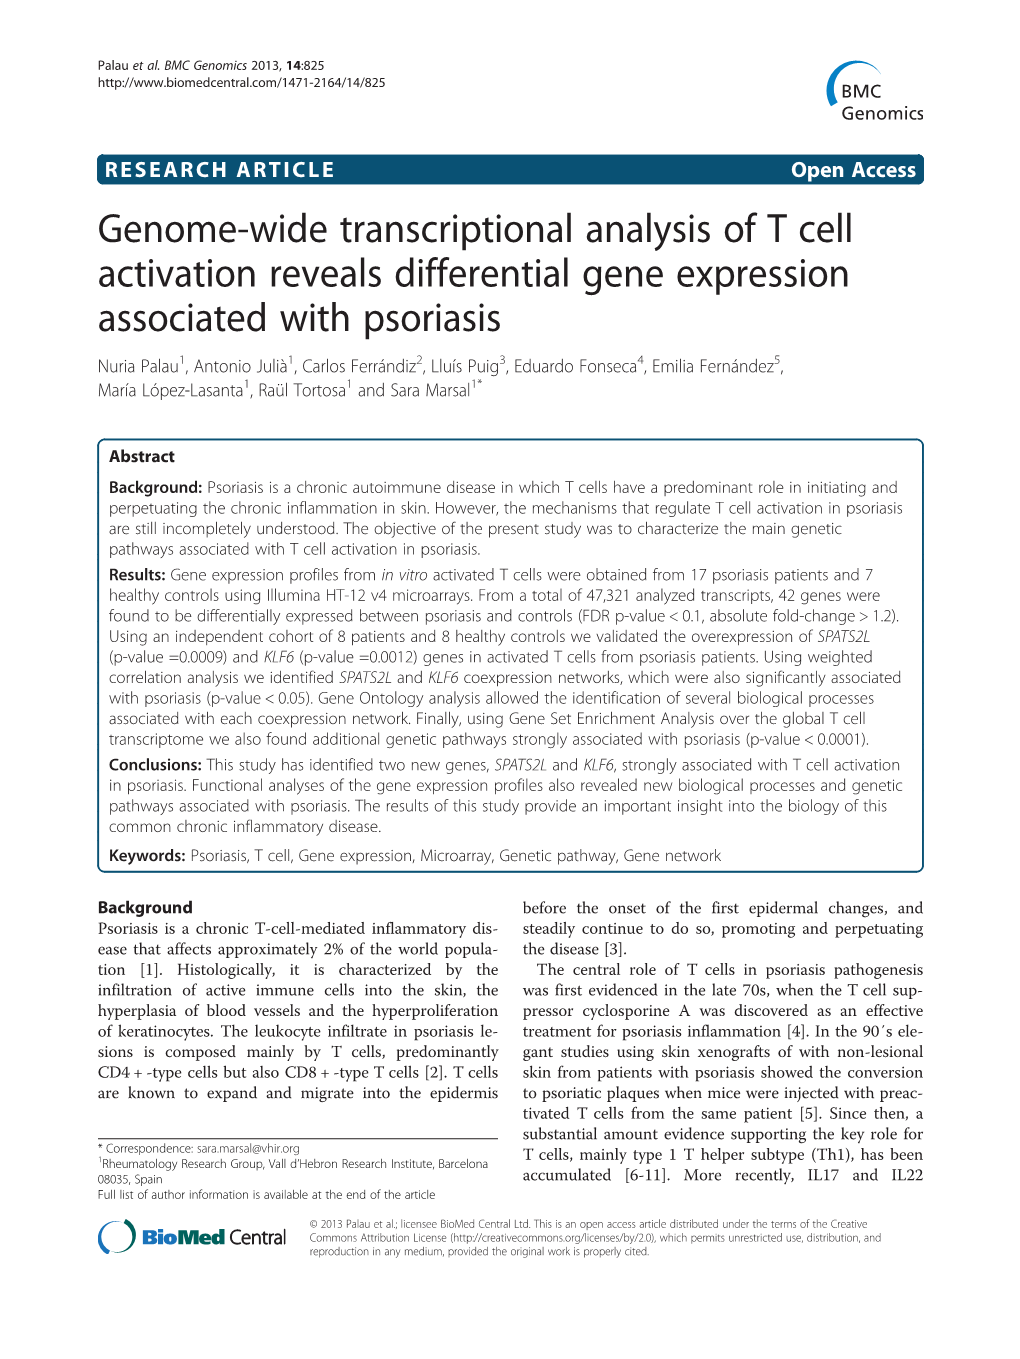 Genome-Wide Transcriptional Analysis of T Cell Activation Reveals